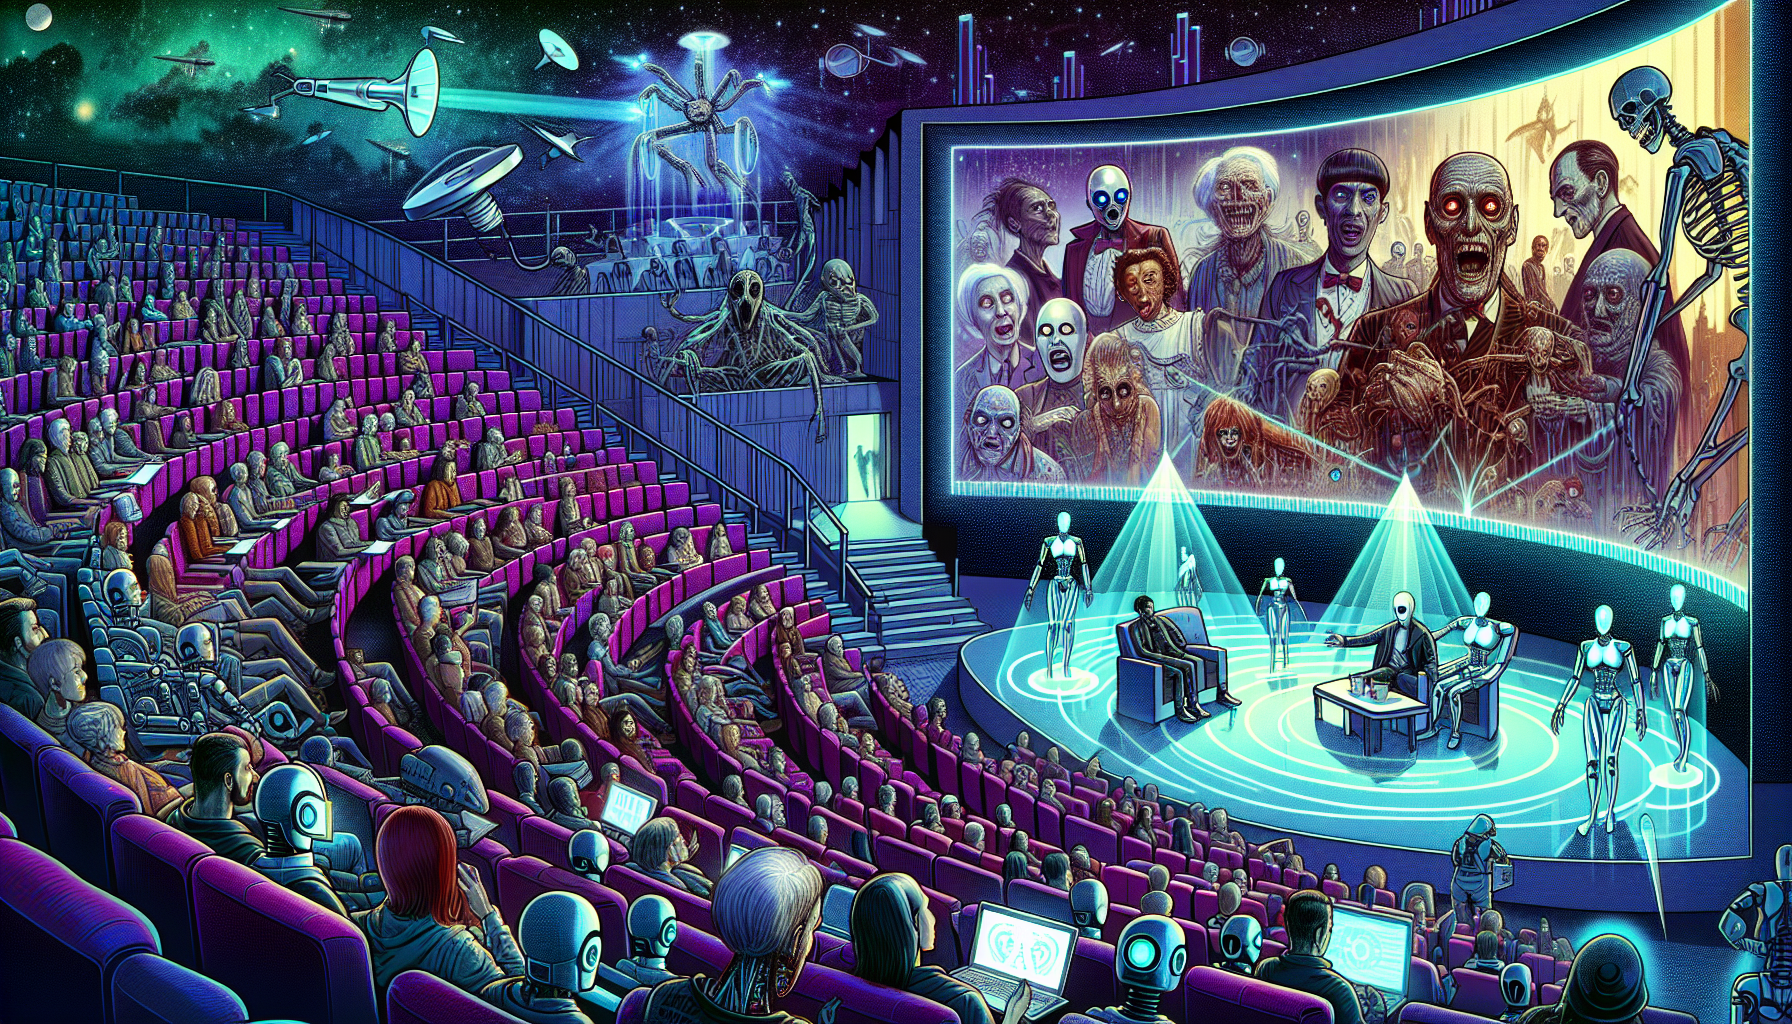 An eerie cinema auditorium with futuristic design elements, screens displaying classic horror scenes morphing into advanced 3D holographic displays. Diverse audience members, including robotic and hum